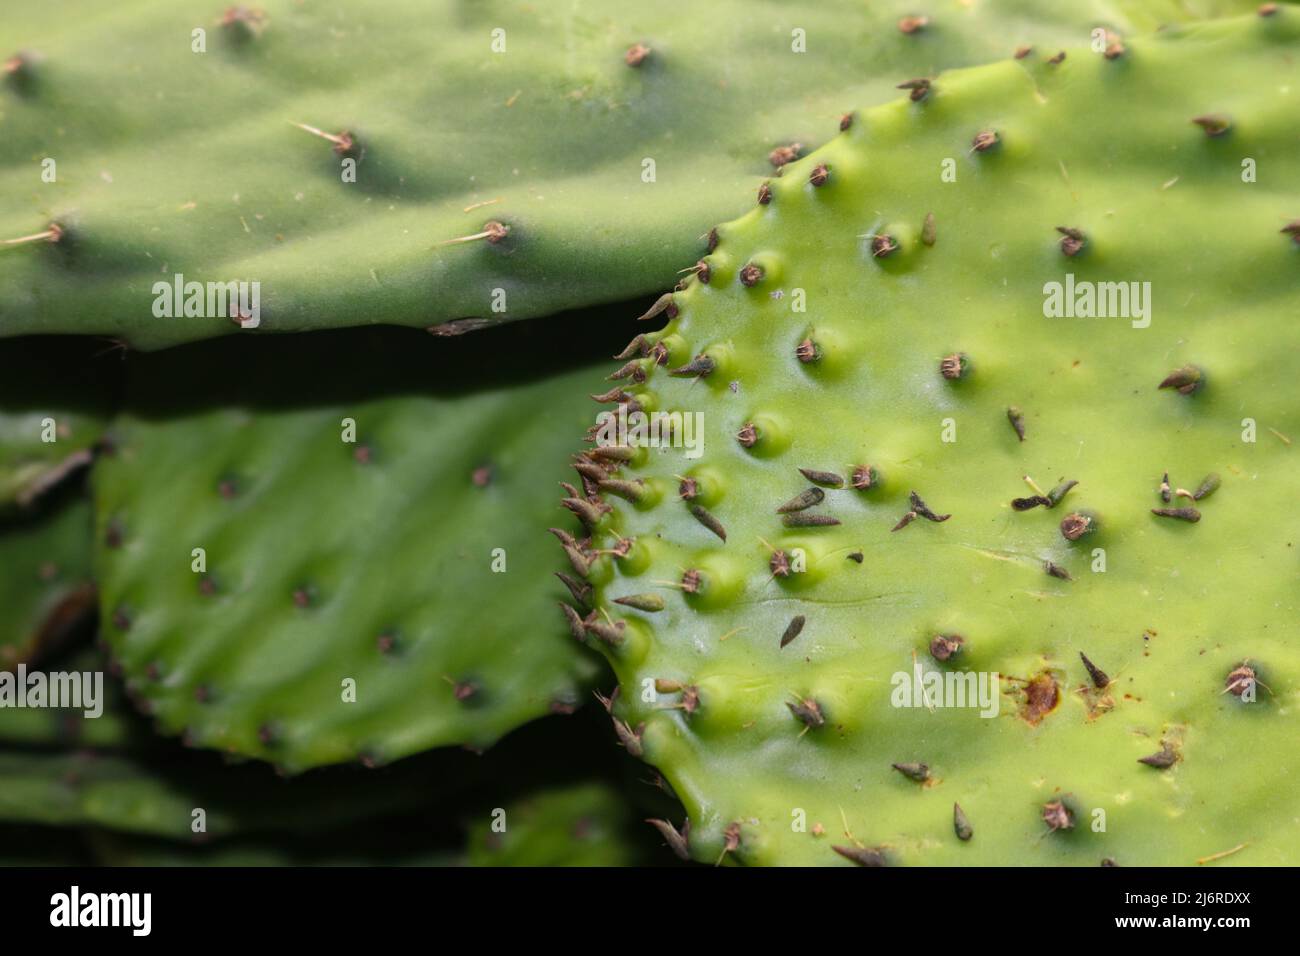 Closeup of Nopal con espinas or the Opuntia cacti or prickly pear a common indgredient in Mexicn cuisine dishes and medicine Stock Photo